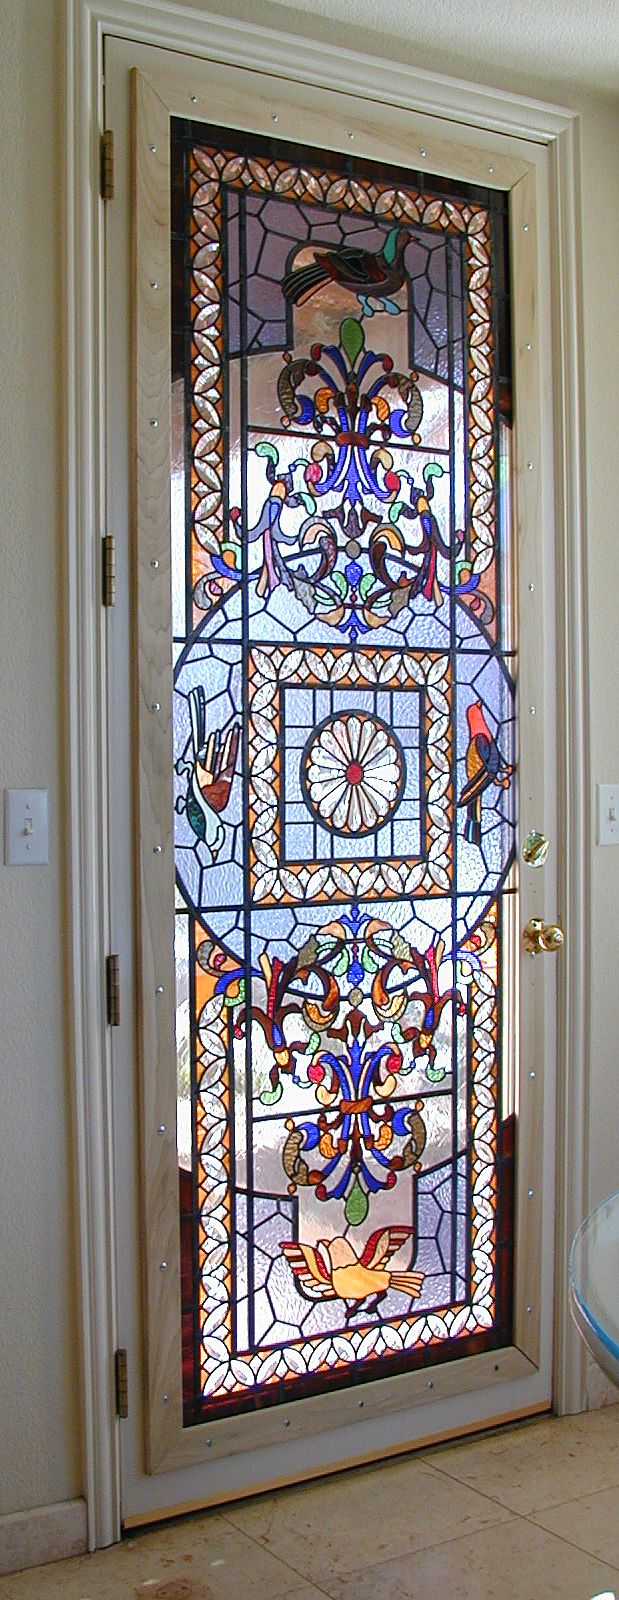 intricate stained glass